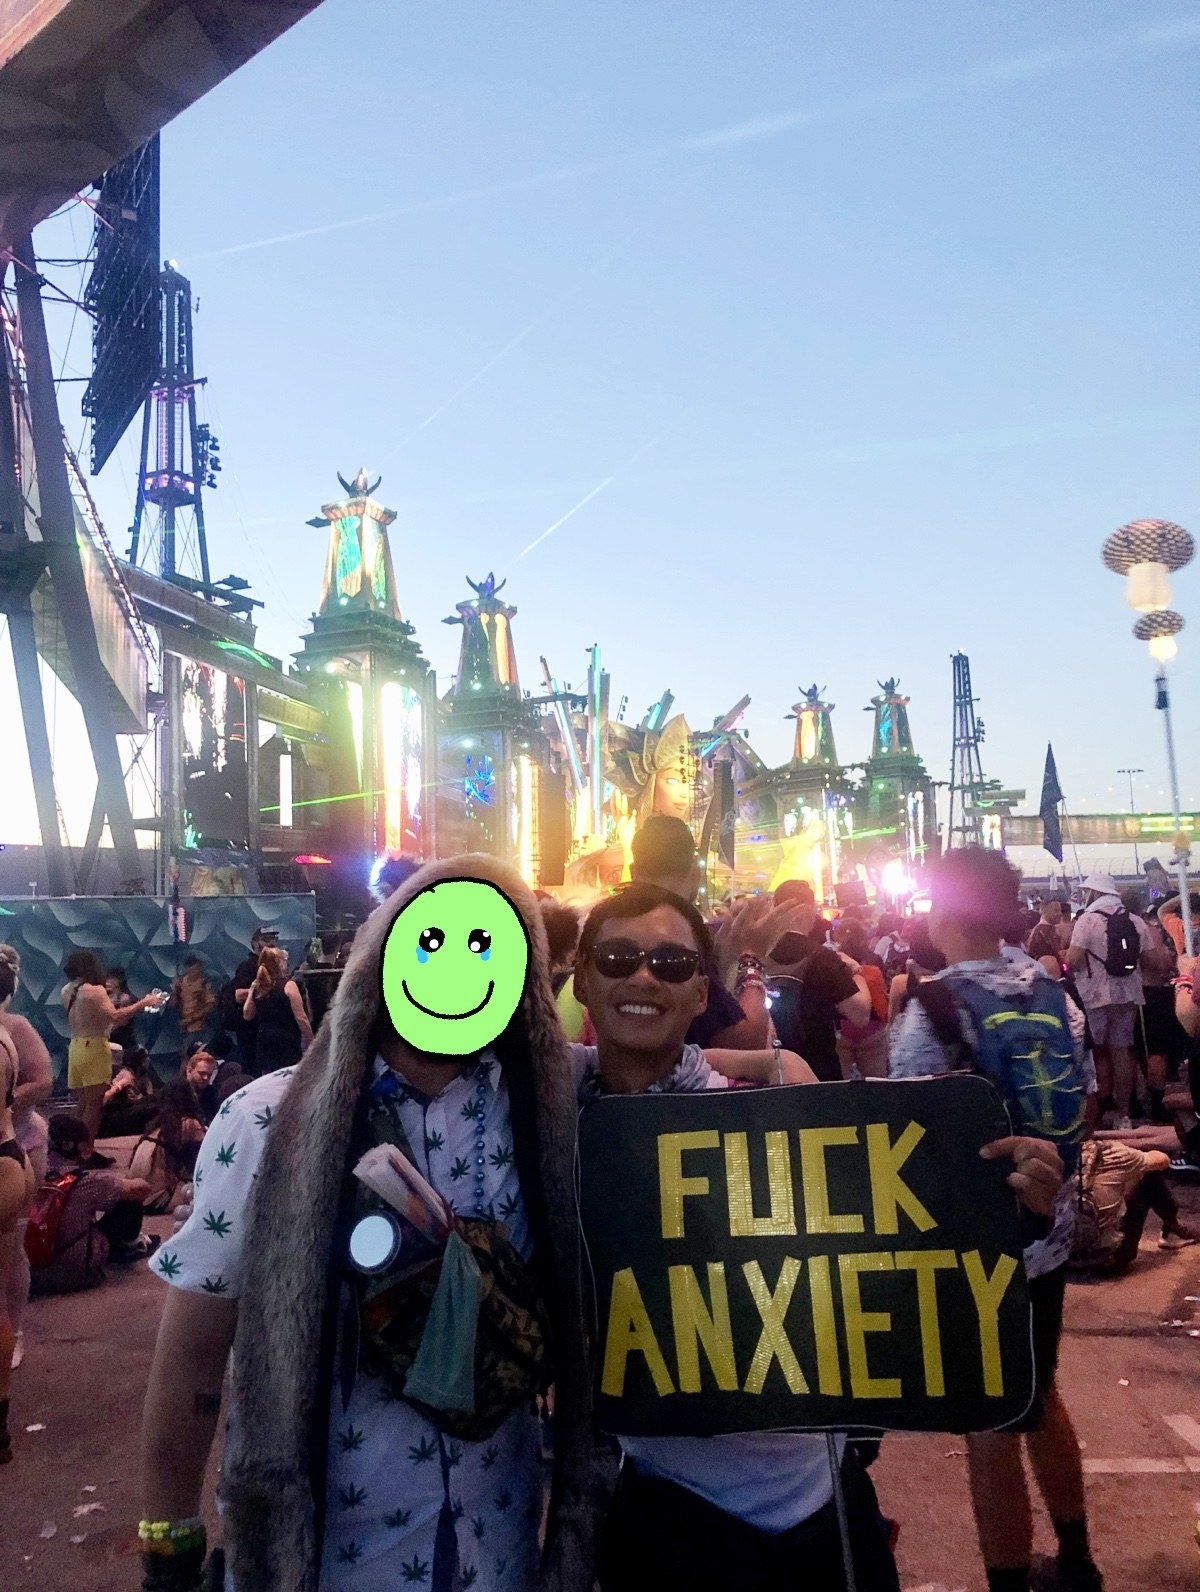 author with fellow raver at edc rave